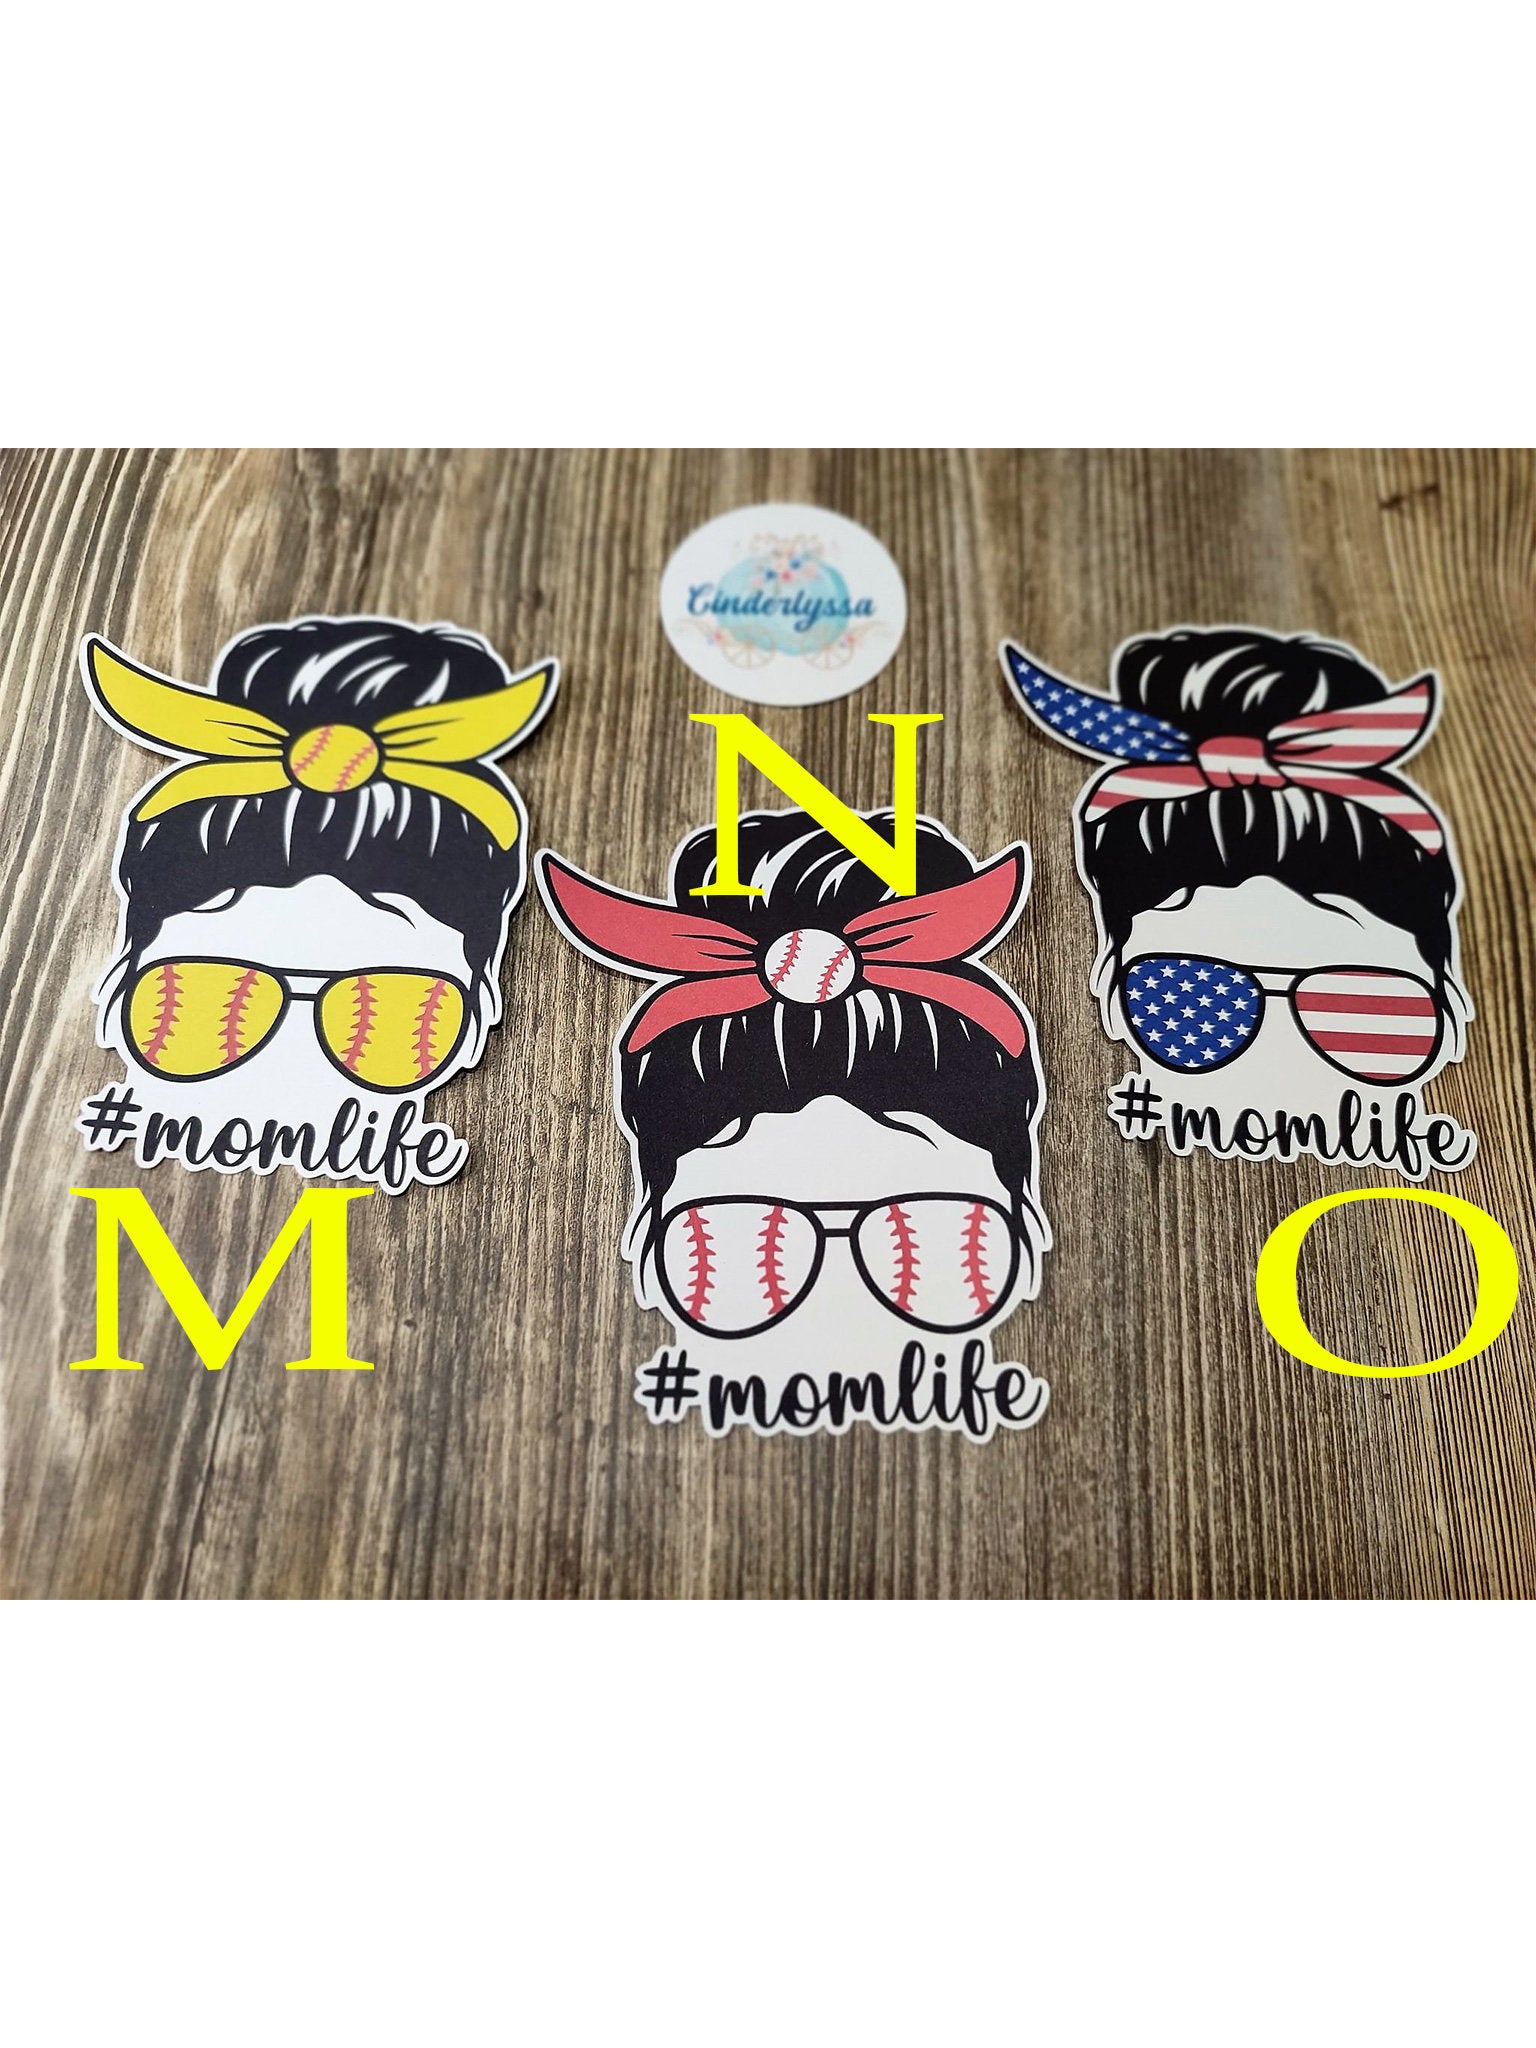 Mom Life: Messy Bun Girl-Glasses Buffalo Plaid, Leopard, Tie Dye Silicone Mold, Aroma Bead Molds, Car Freshie Mold, Premium Cardstock Images